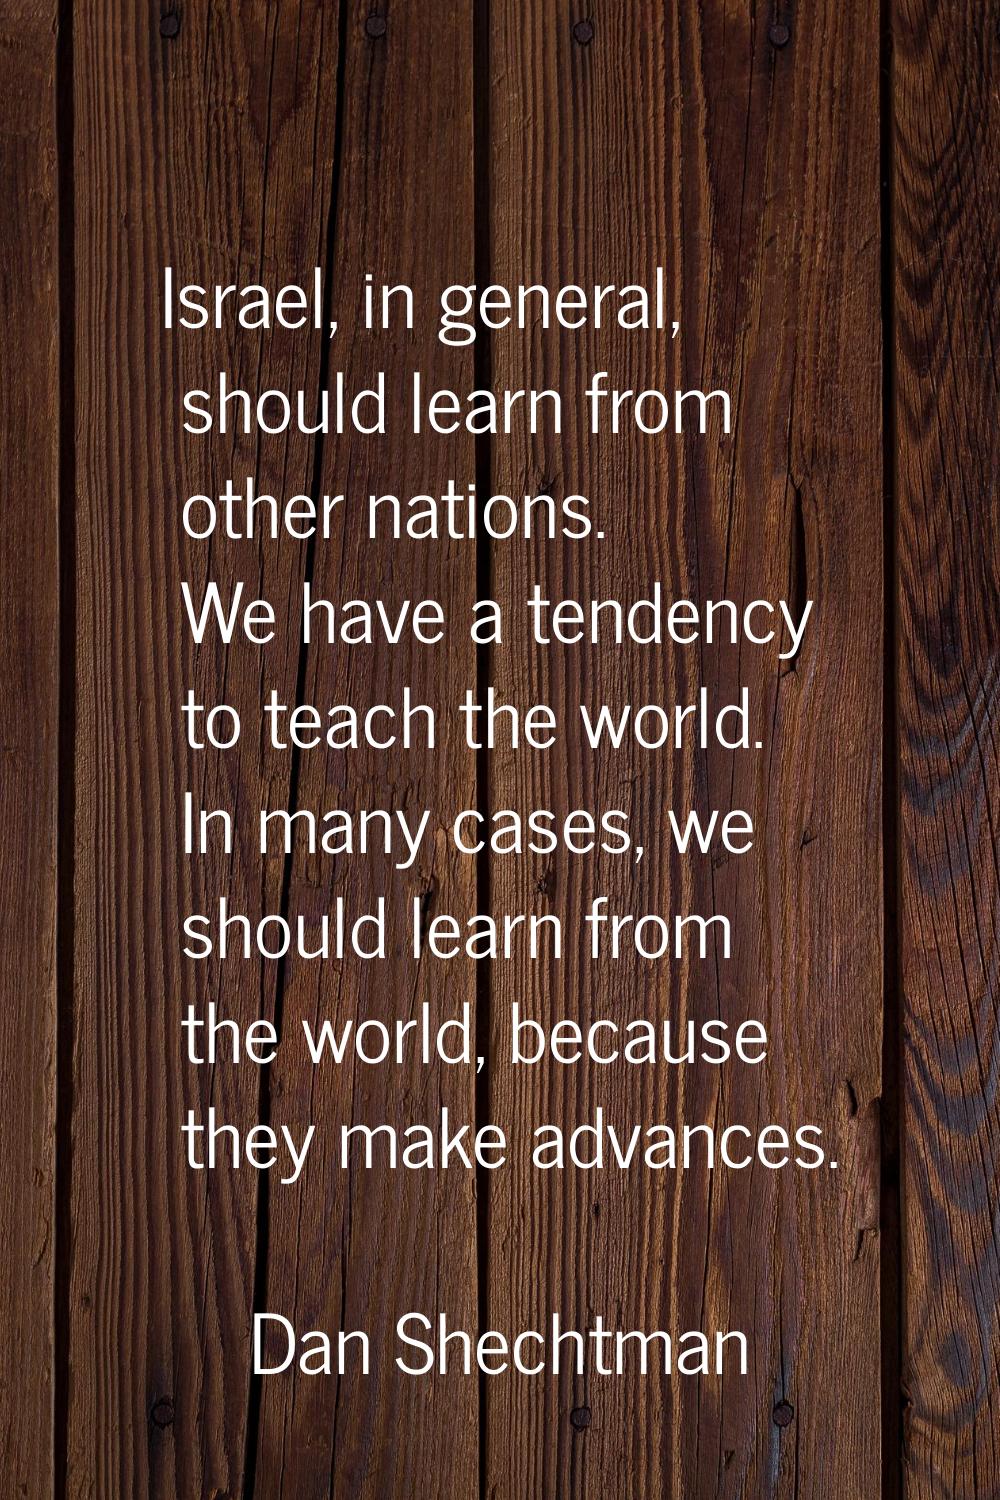 Israel, in general, should learn from other nations. We have a tendency to teach the world. In many